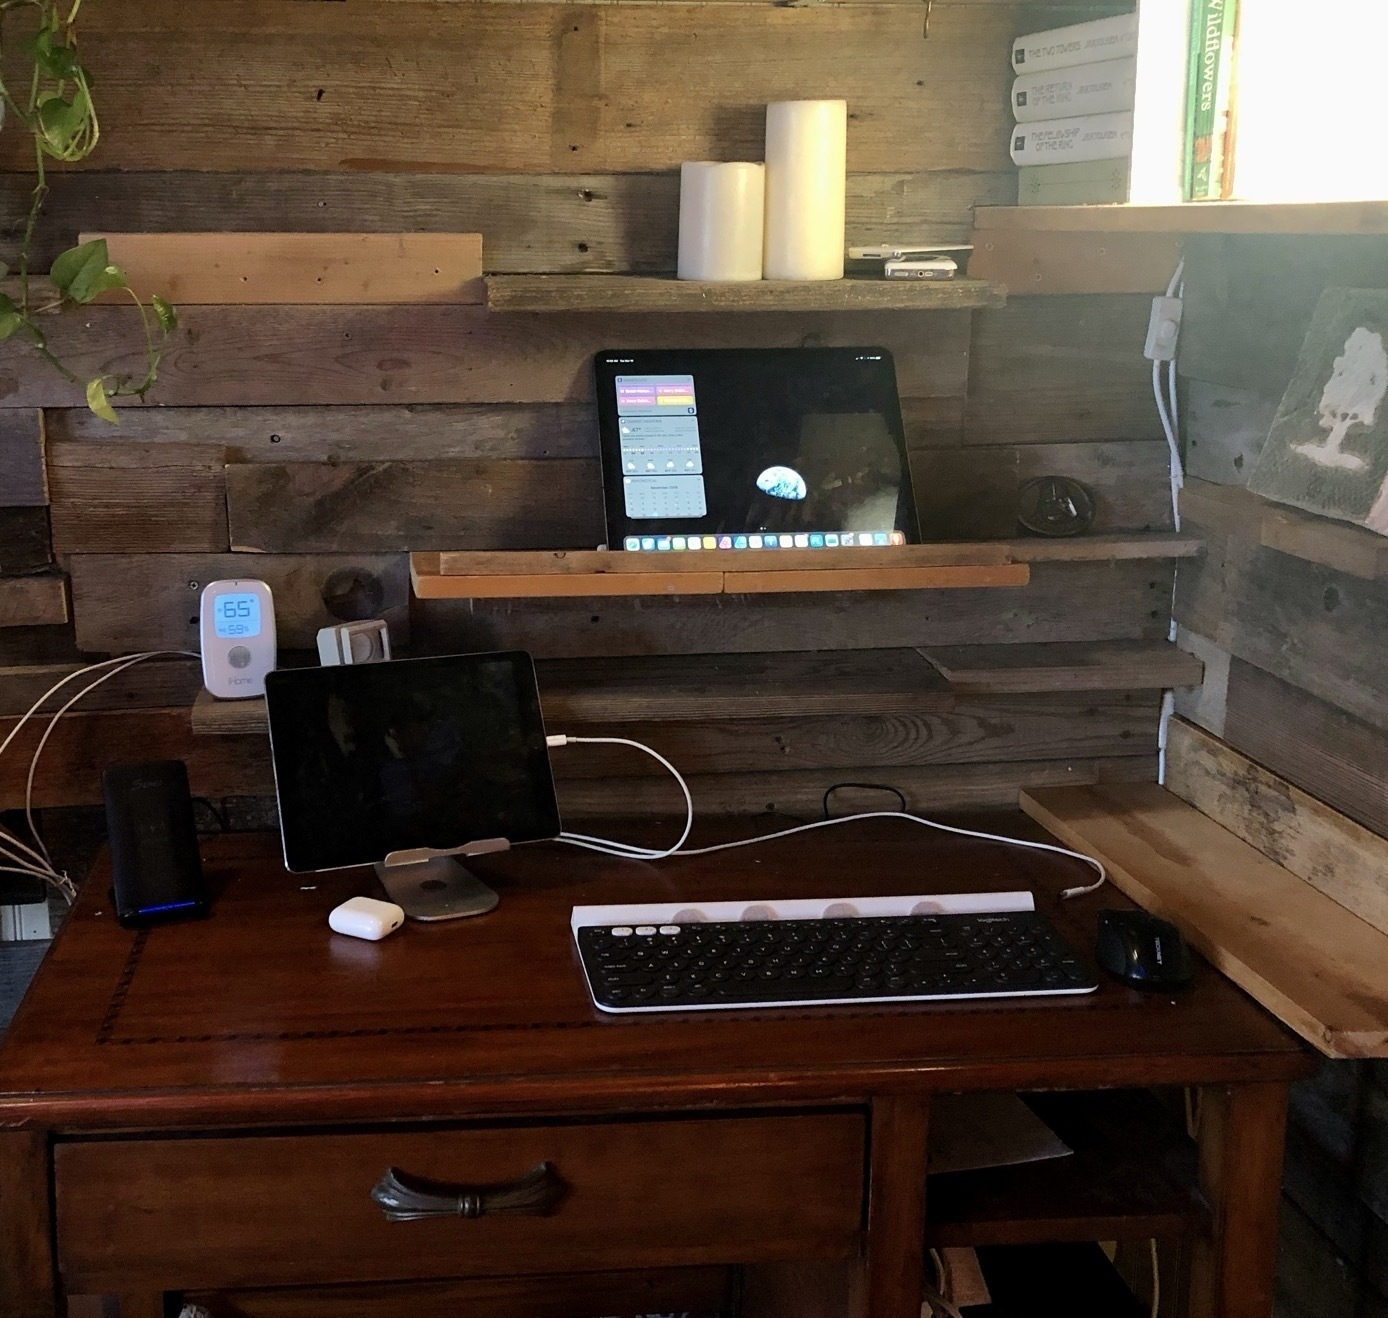 A desk near a wood plank wall with various shelves. An iPad is in a stand on the desk near a keyboard. A second iPad sits on a shelf at eye level behind the desk